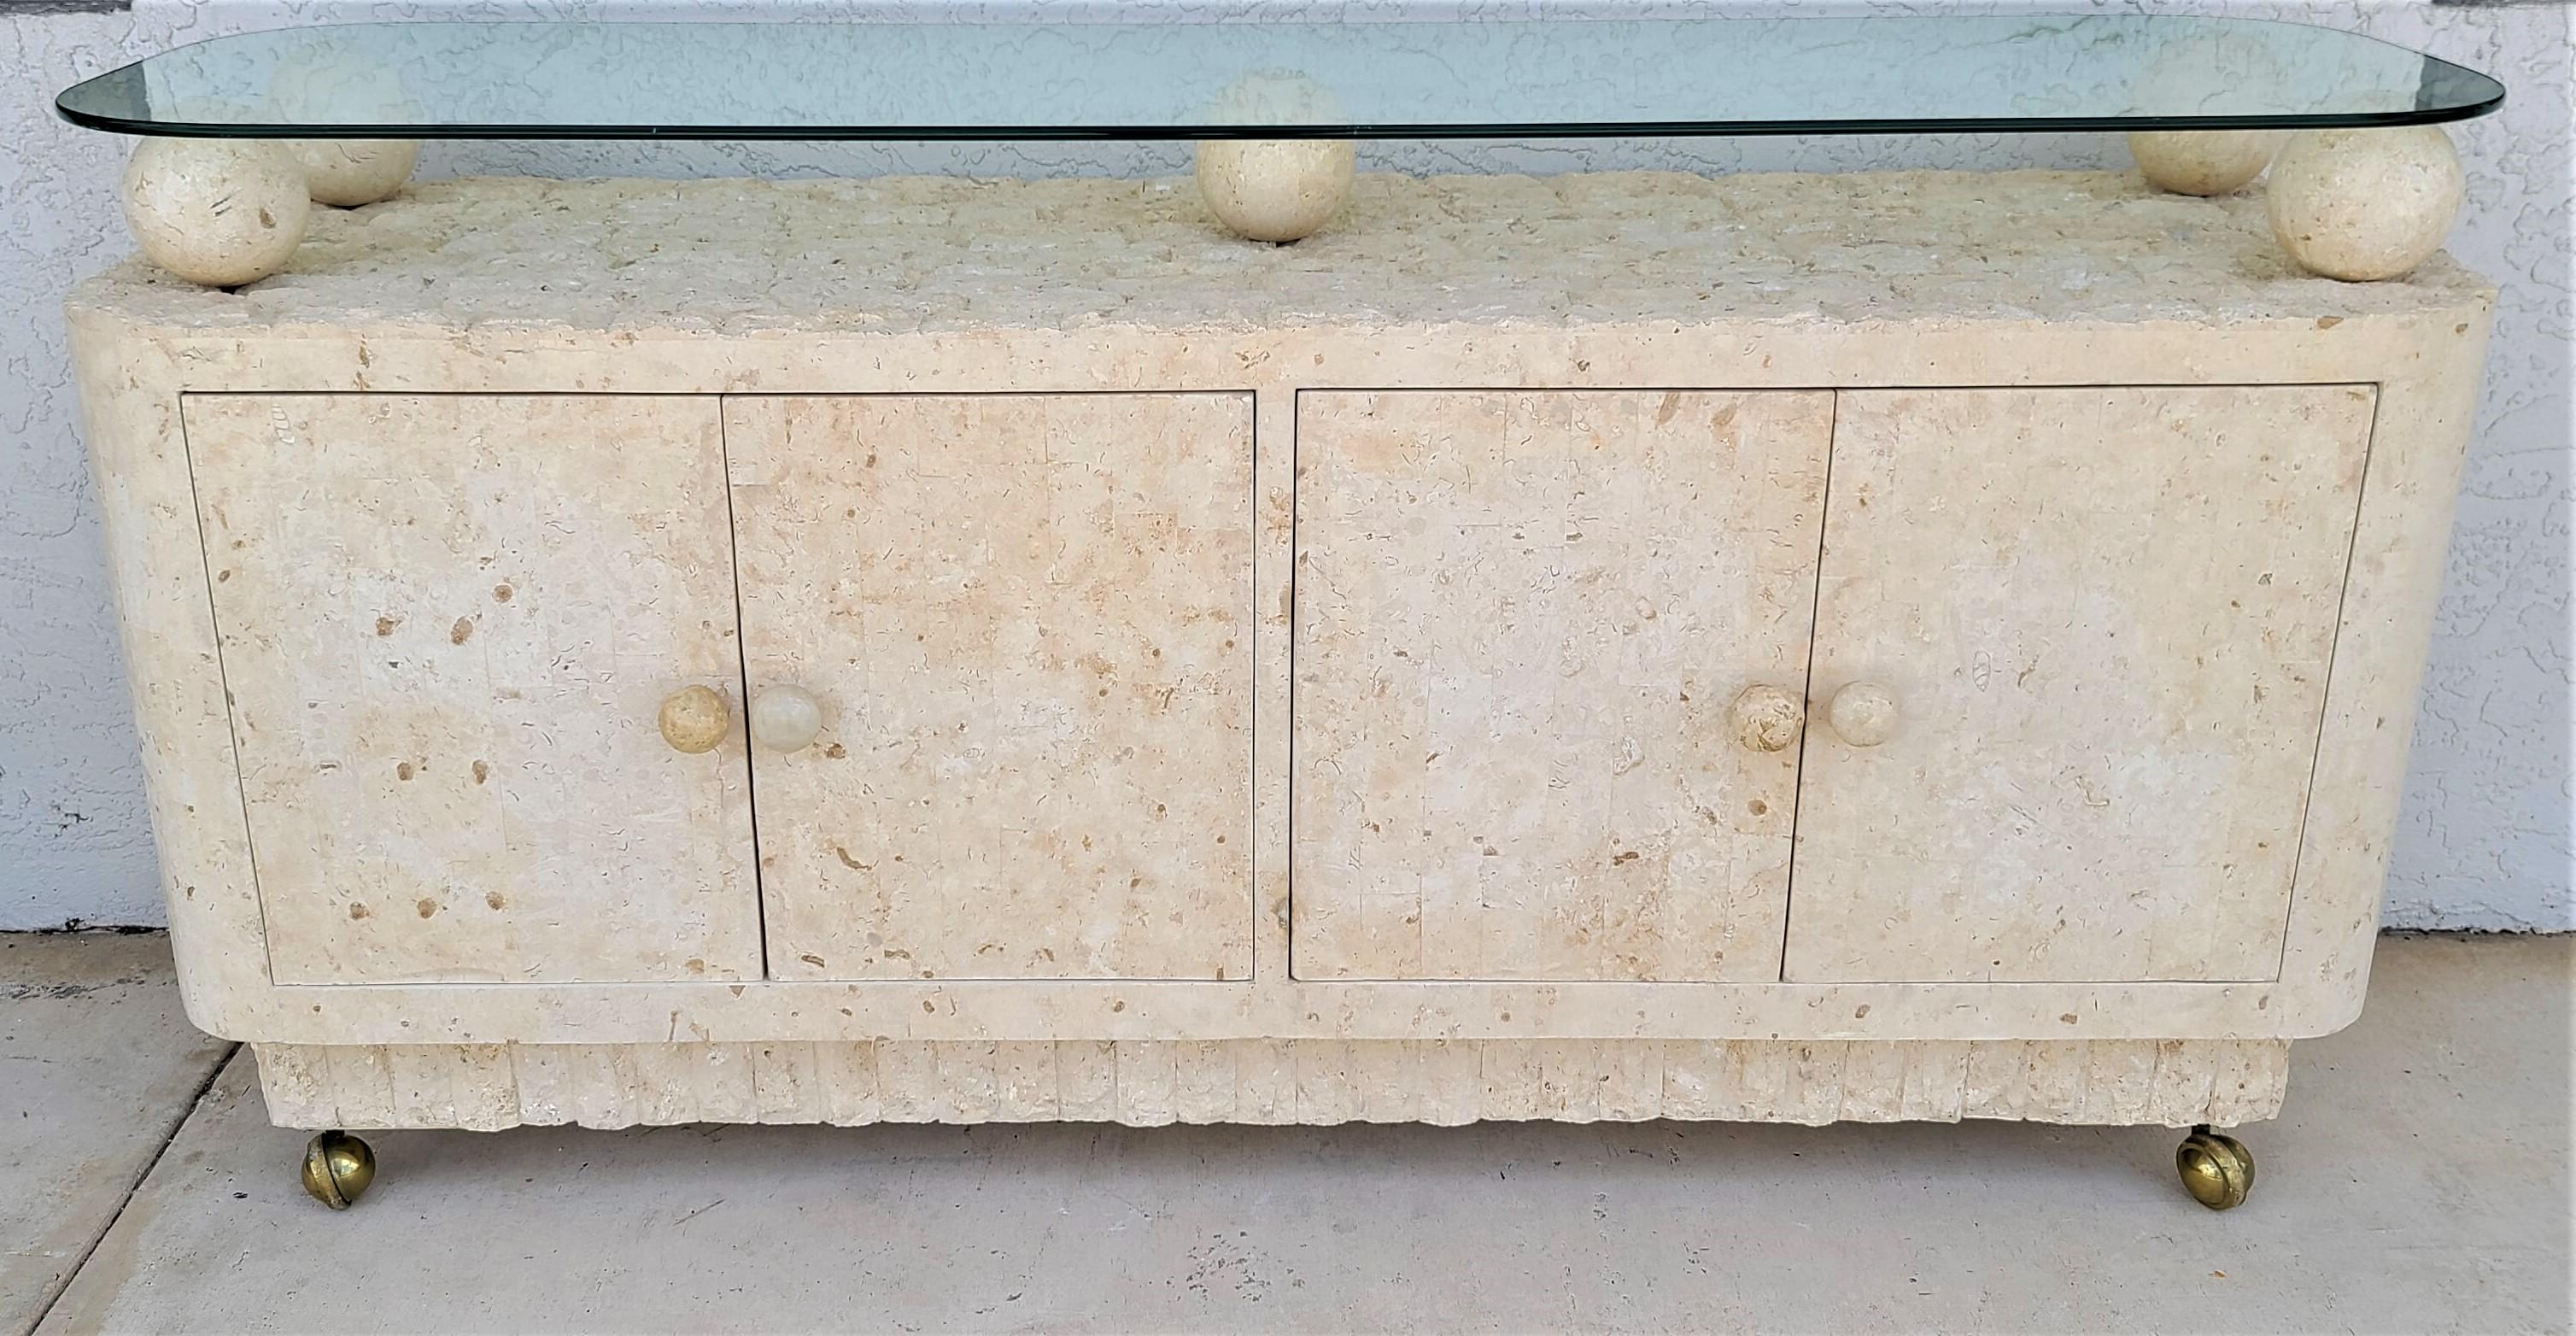 Offering one of our recent Palm Beach Estate Fine furniture acquisitions of a
1980's postmodern tessellated mactan stone credenza buffet dry bar 
Designed in the style of Maitland Smith and attributed to Magnussen

Featuring tessellated stone